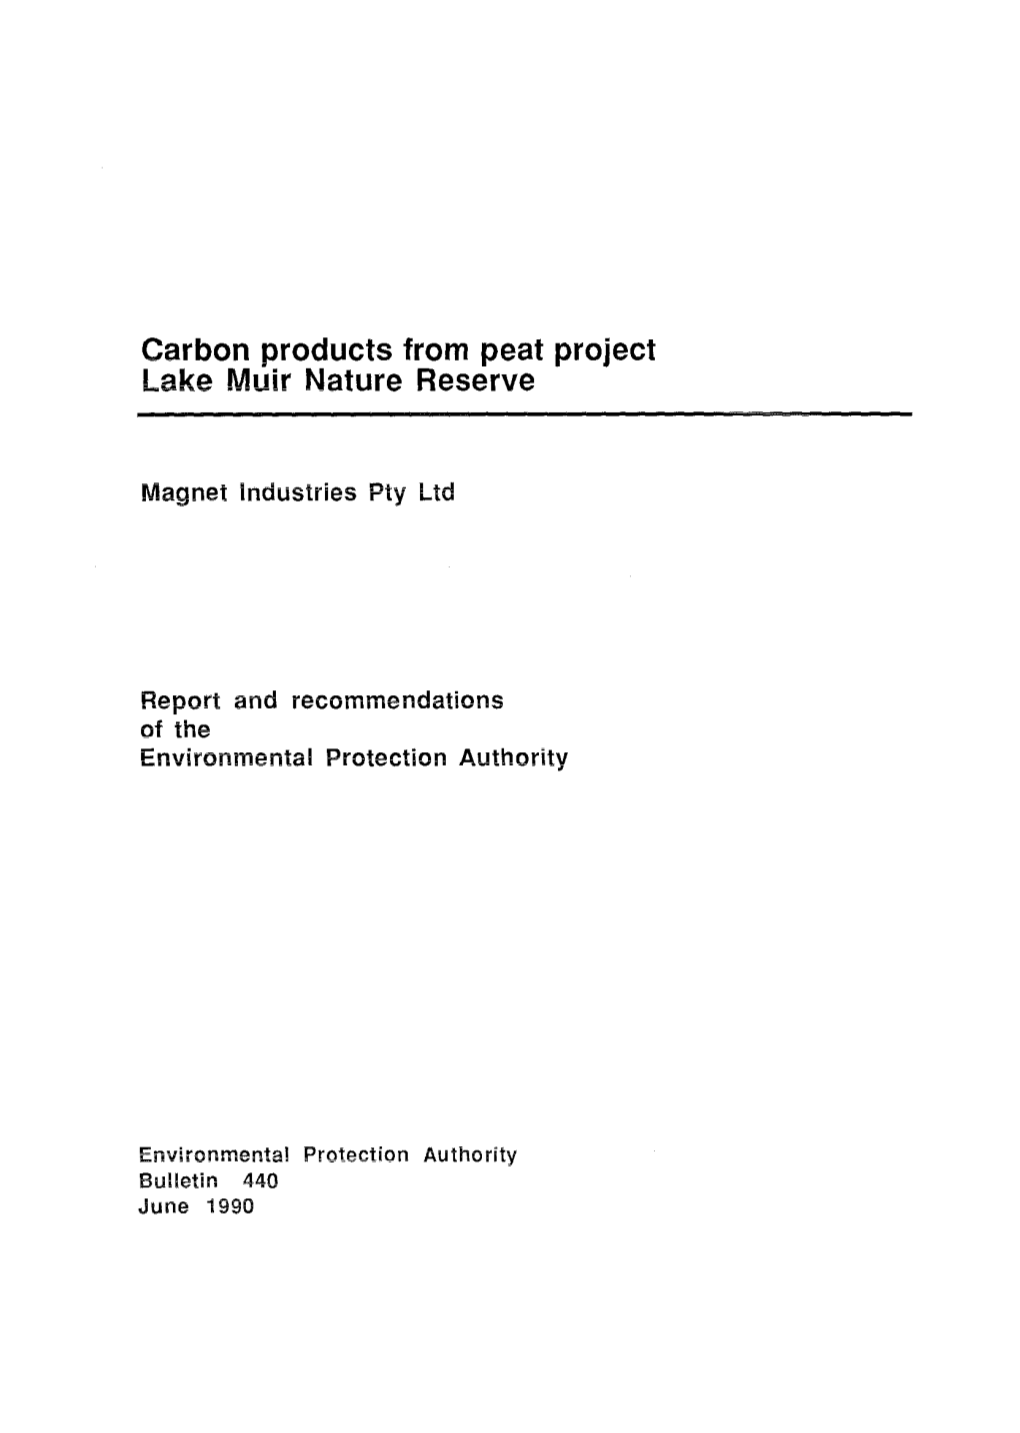 Carbon Products from Peat Project, Lake Muir Nature Reserve (PDF